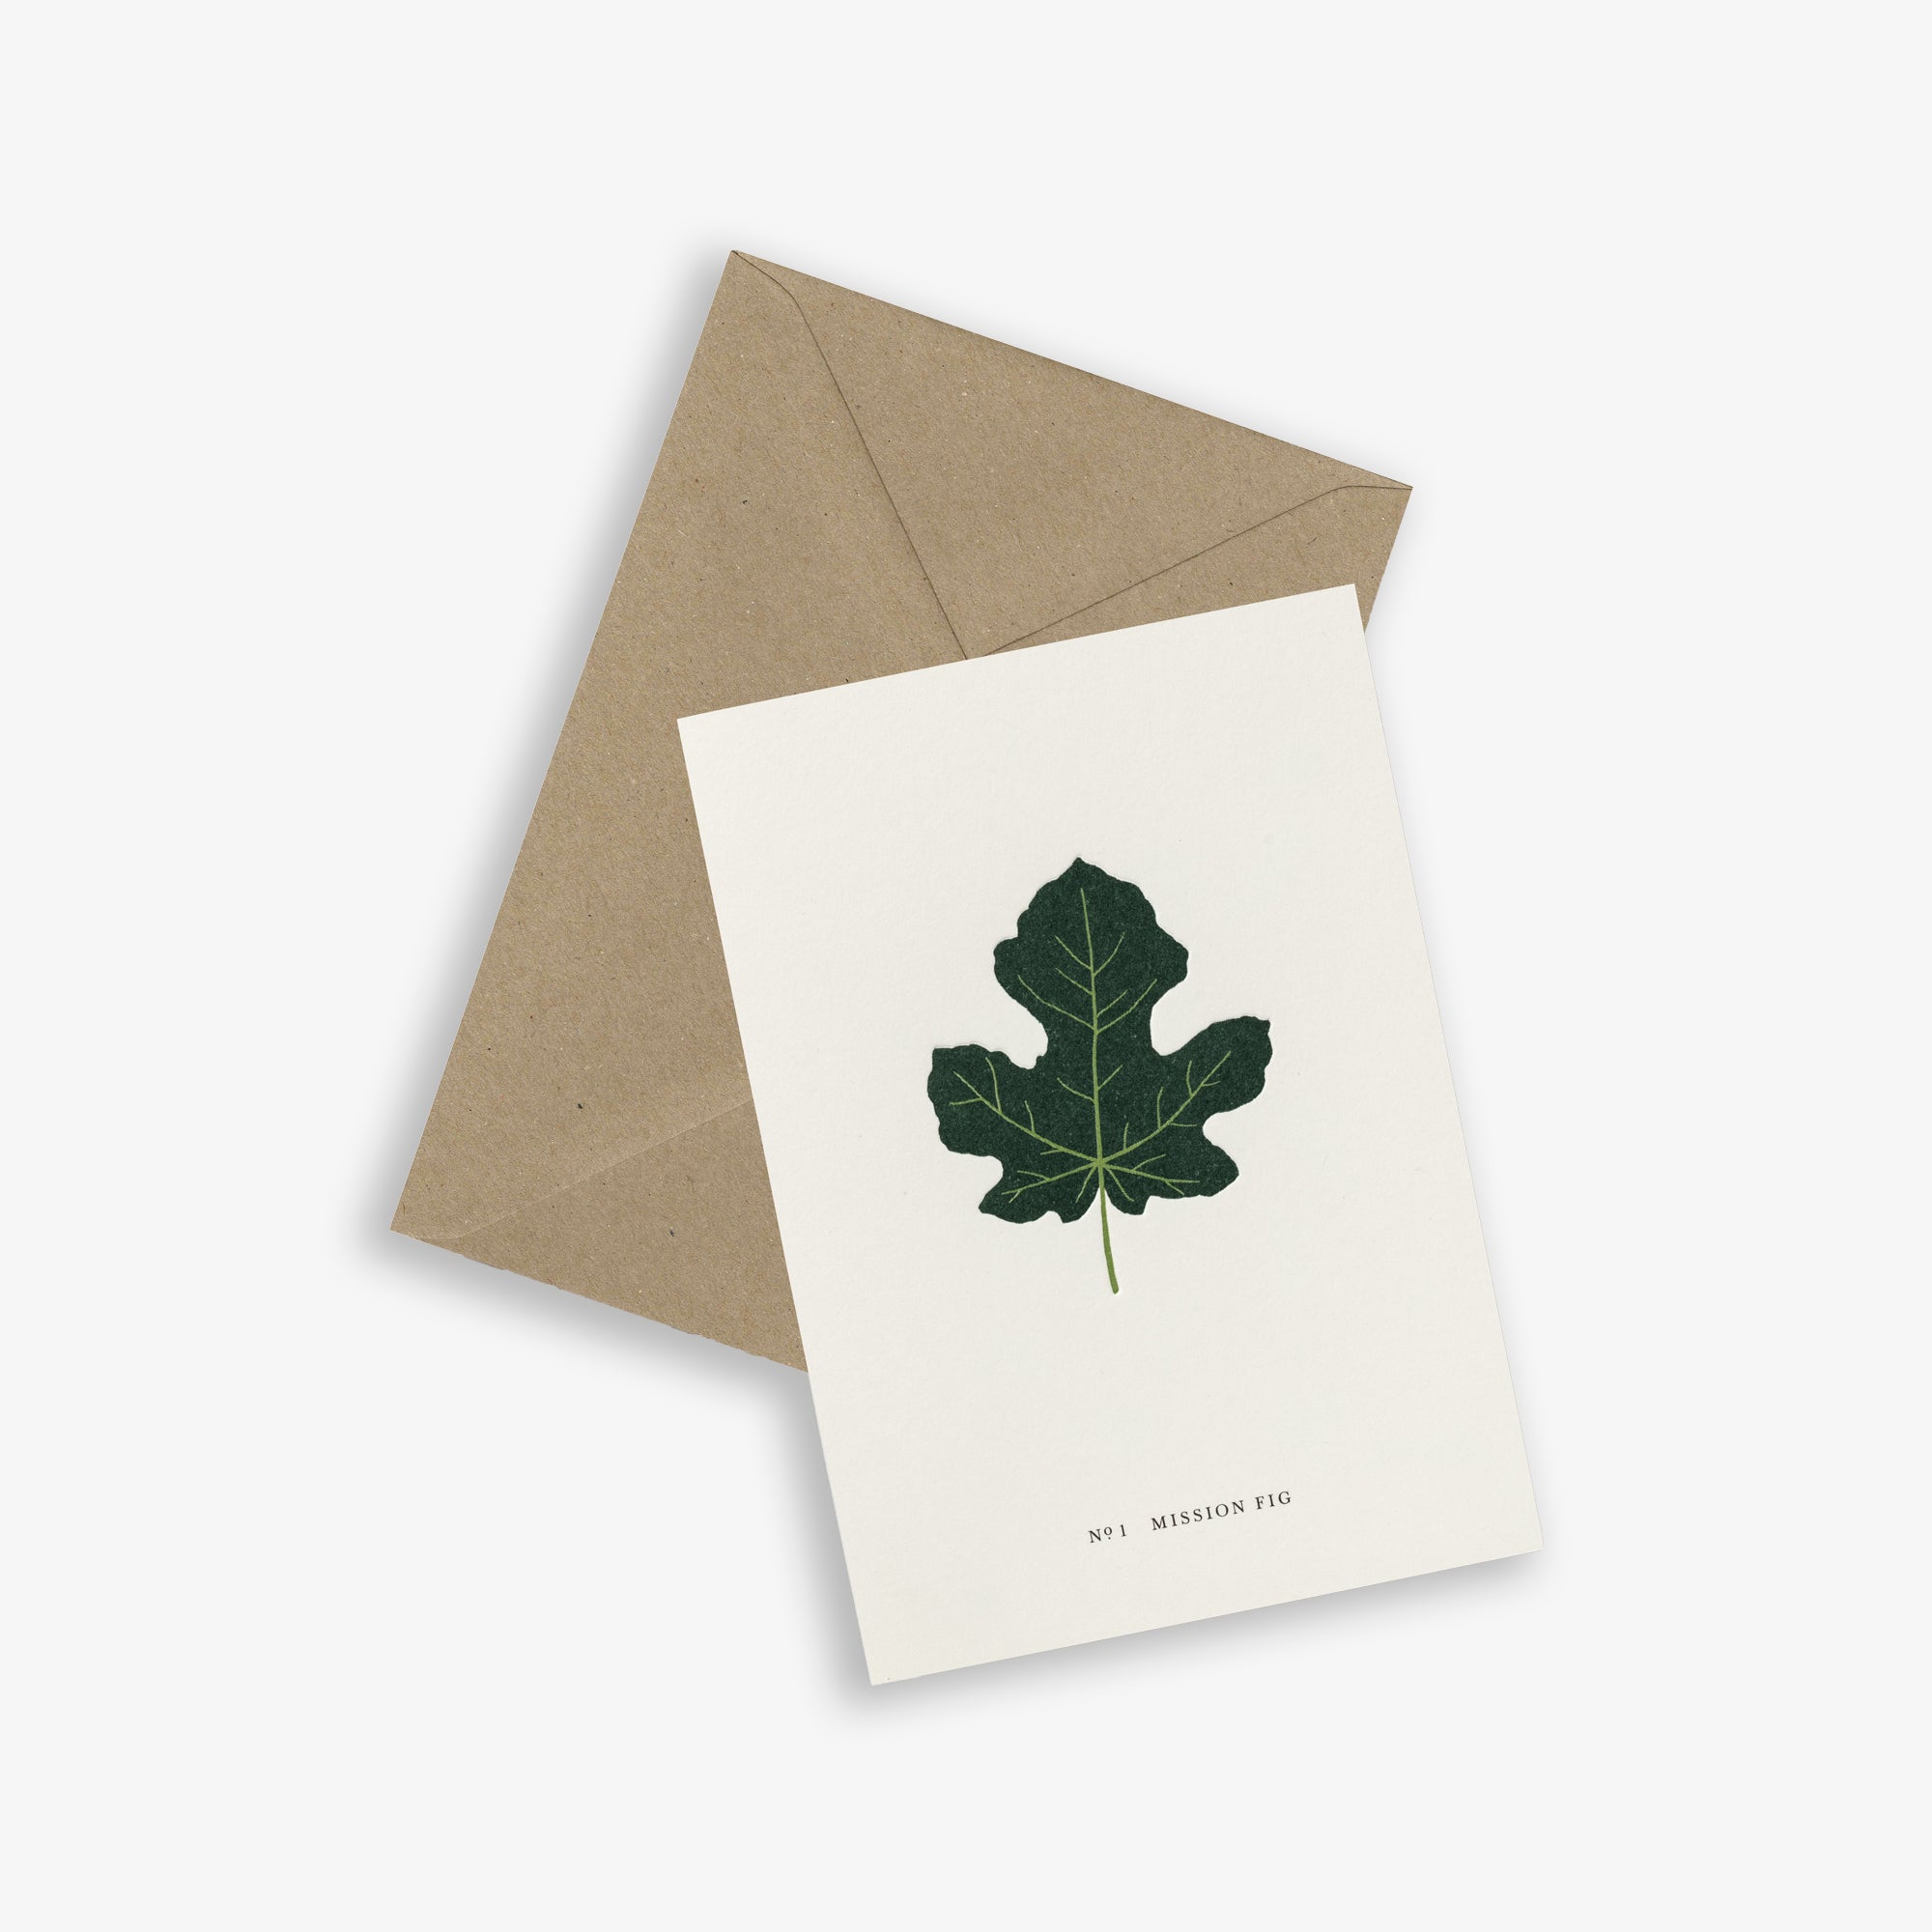 GREETING CARD // MISSION FIG